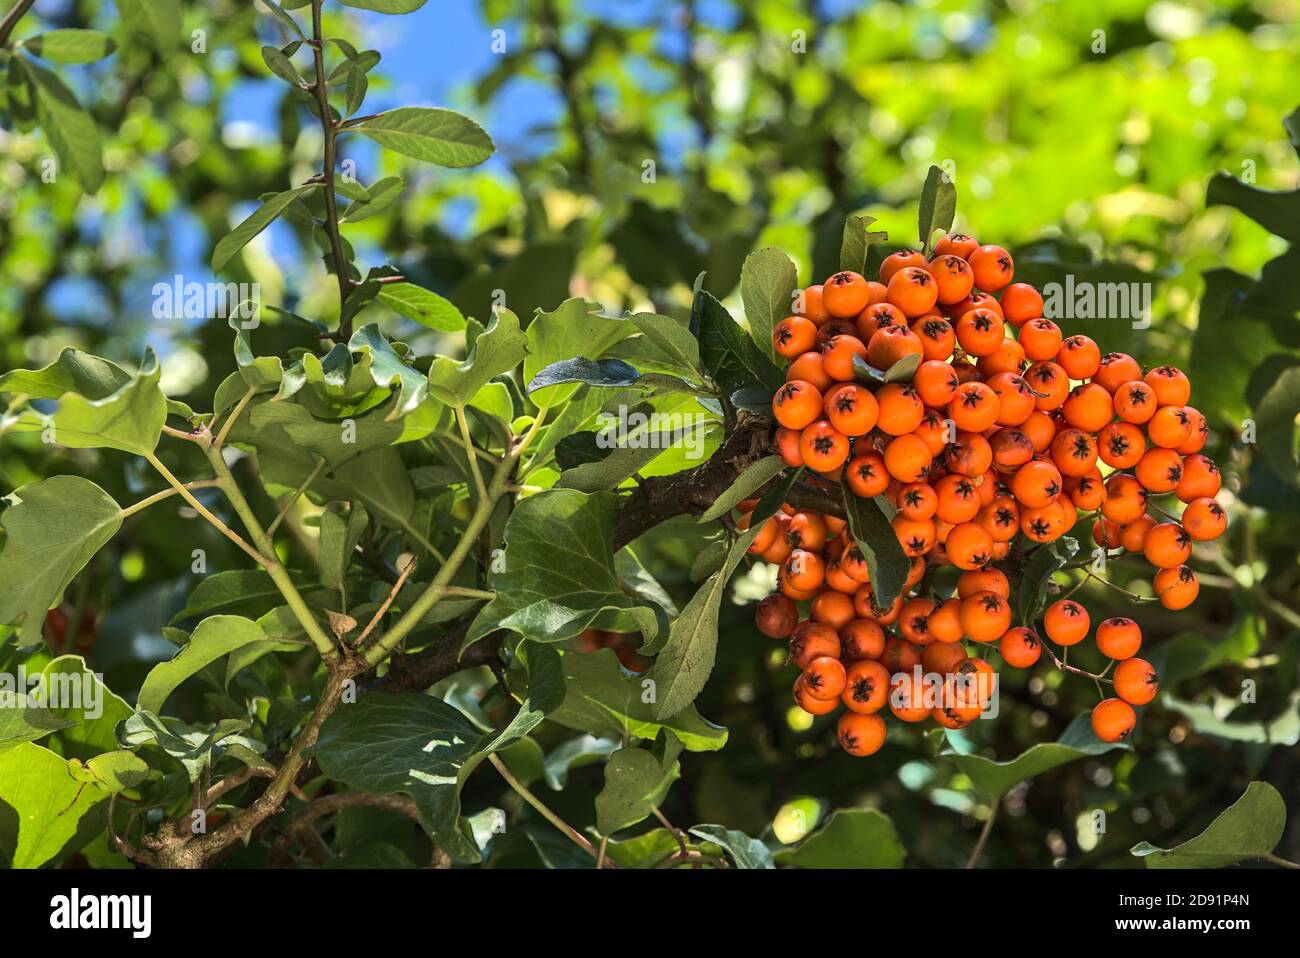 Beautiful orange ripe hawthorn berries (Pyracantha angustifolia) on tree with green leaves. Absolutely amazing autumnal colorful nature vibes Stock Photo